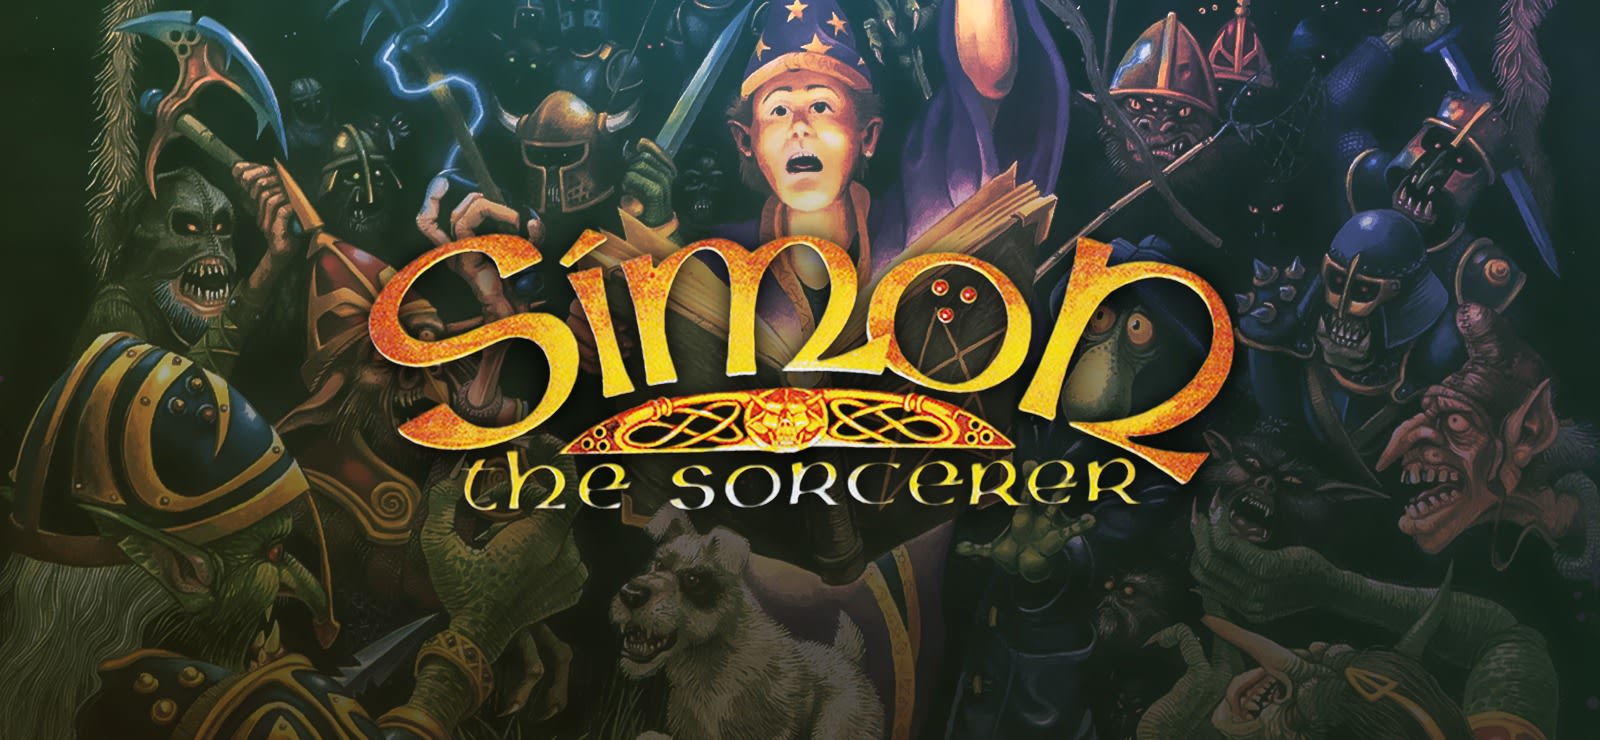 Simon the sorcerer game download